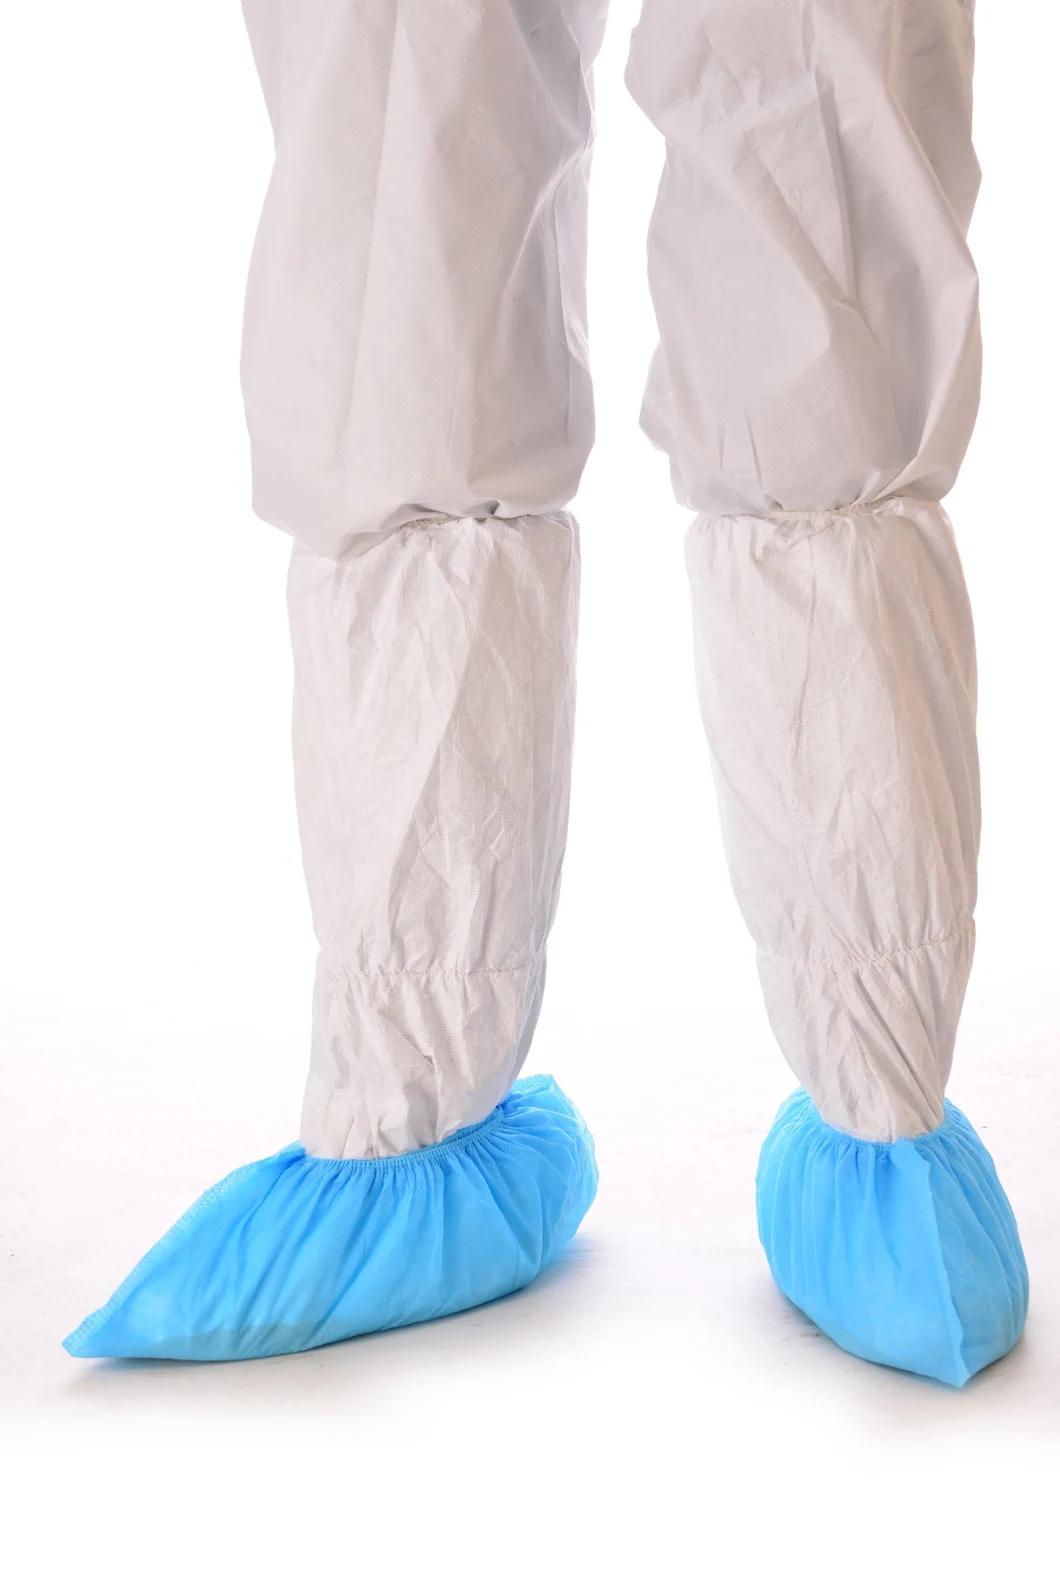 Doctor Use Elasticated Non-Woven Shoe Cover Disposable PP Shoe Cover